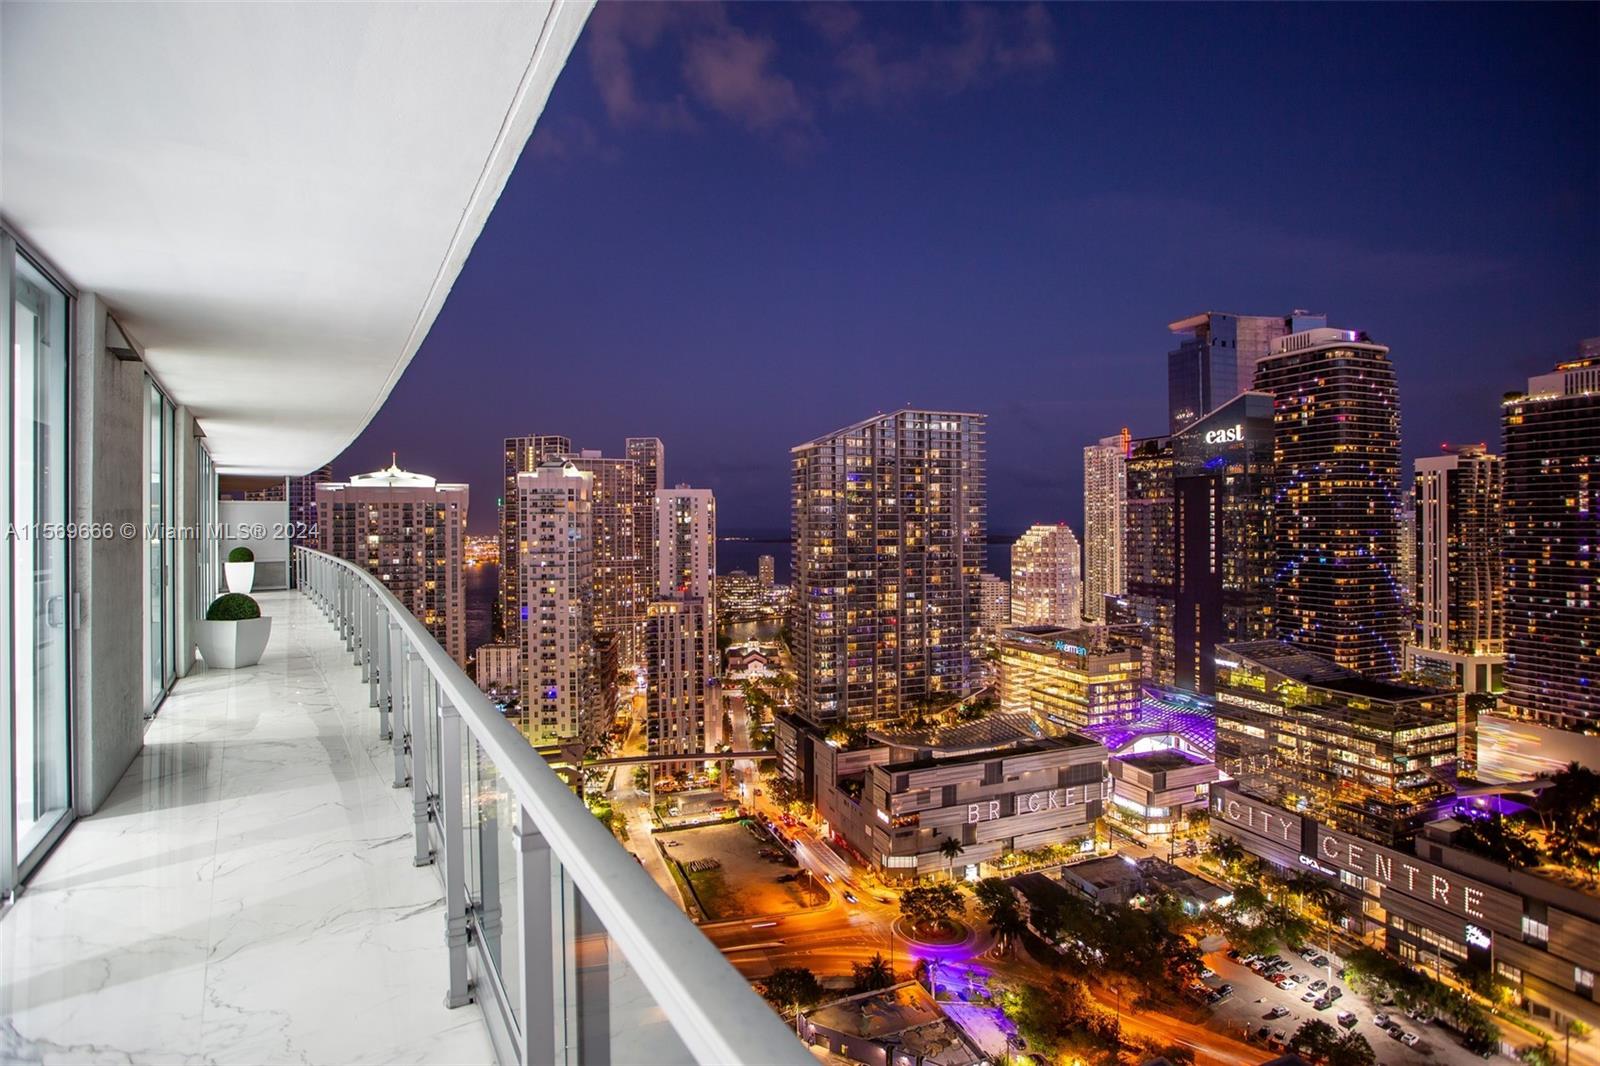 Impeccable 3 bed / 3.5 bath residence with 2,356 SF of living space overlooking magical views of the Bay and Brickell skyline. This unique condo is a combination of 2 units converted into one spacious home. Upon entry, you’re greeted w/ large entertaining spaces looking out to picture perfect views. Kitchen features Bosch appliances, a large island, & built in TV. Formal Dining room has butlers pantry w/ wine fridge overlooking city & bay views. Both secondary bedrooms are ensuite w/ spacious custom closets. Oversized primary bedroom has a large walk-in closet & bathroom w/ double vanity, shower, & private water closet. Spacious formal laundry room w/ utility sink. Electric blinds, built in ceiling speakers, 2 assigned parking, Custom Italian Wood Doors. HUGE storage available to purchase.